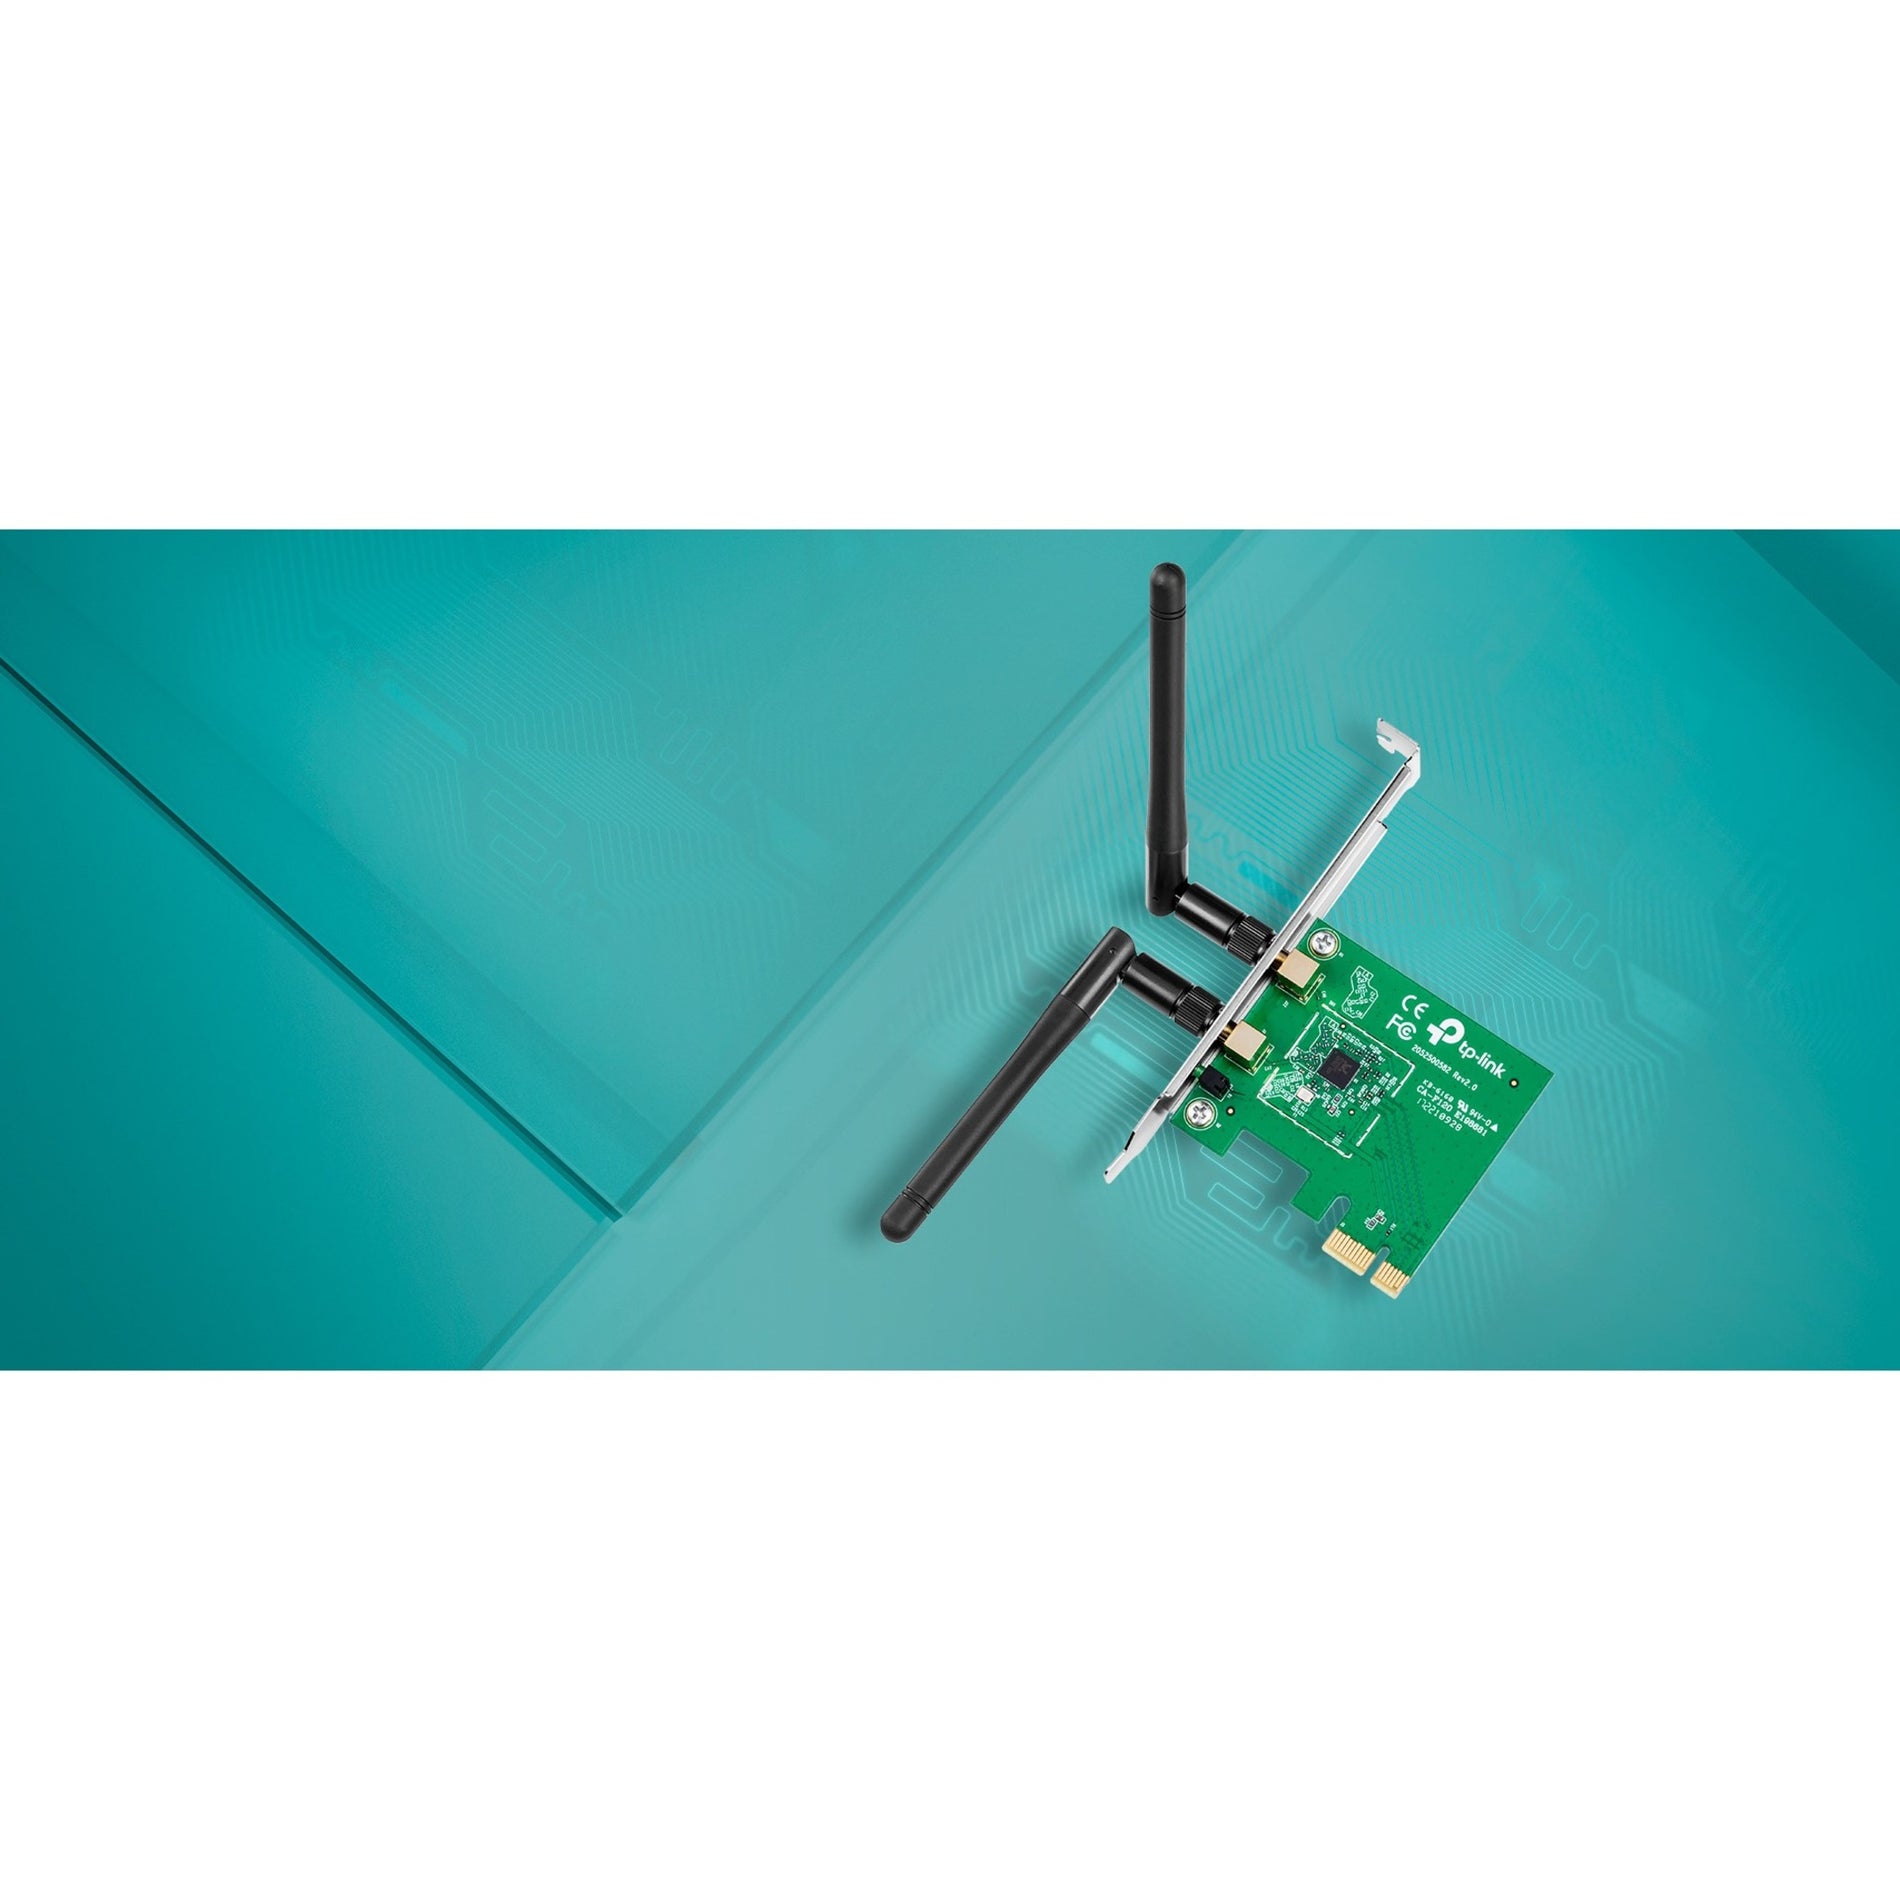 TP-Link 300Mbps Wireless N PCI Express Adapter [Discontinued]